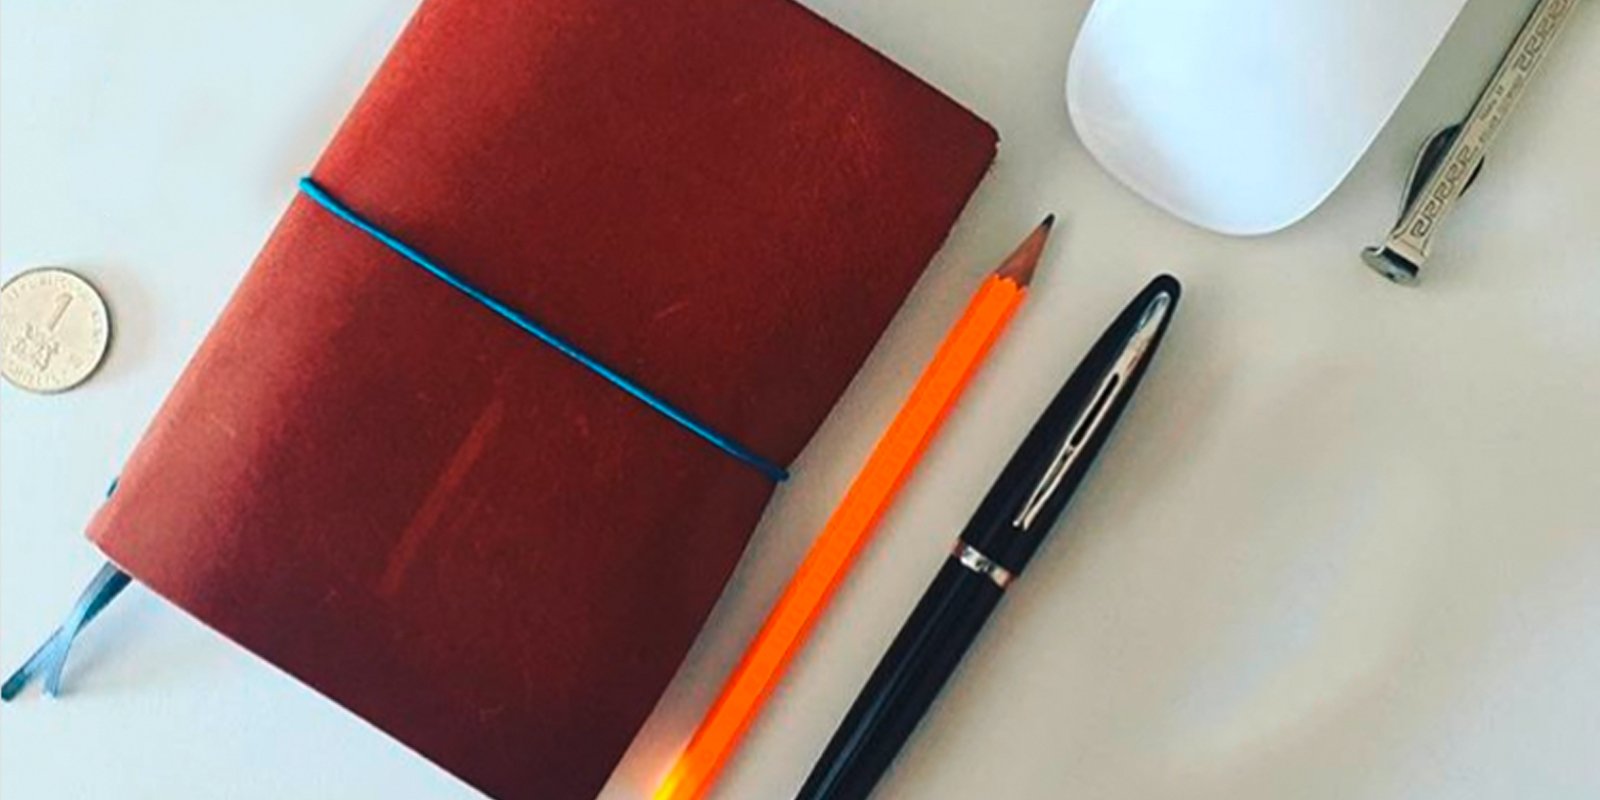 A capped Carene pen on a desk with a pencil, journal and cup of coffee.